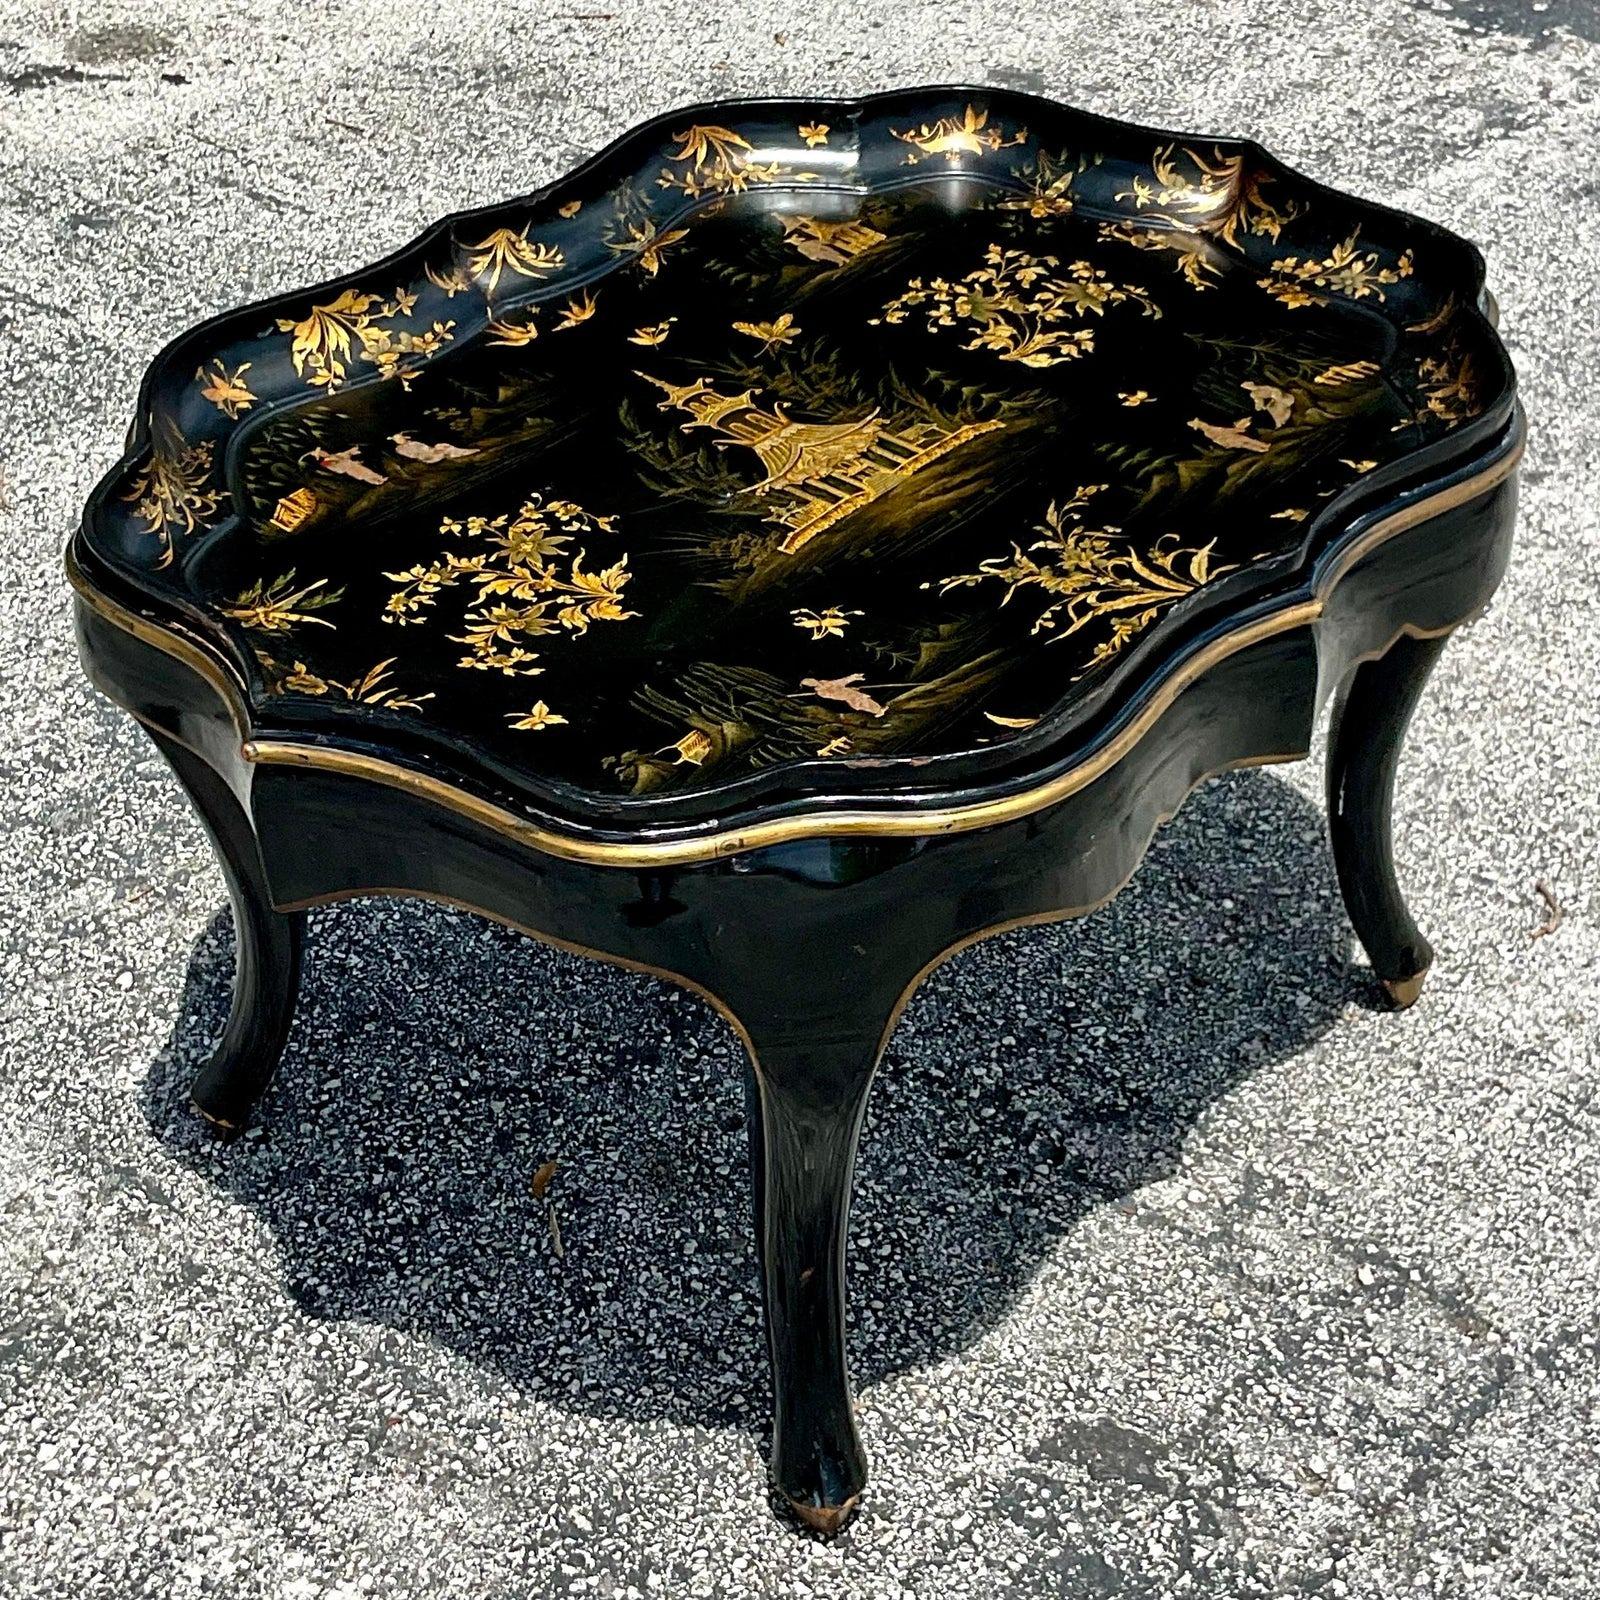 A fabulous vintage Regency coffee tray table. A stunning Paper Mache style with a black lacquered finish and gilt touches. Acquired from a Palm Beach estate.